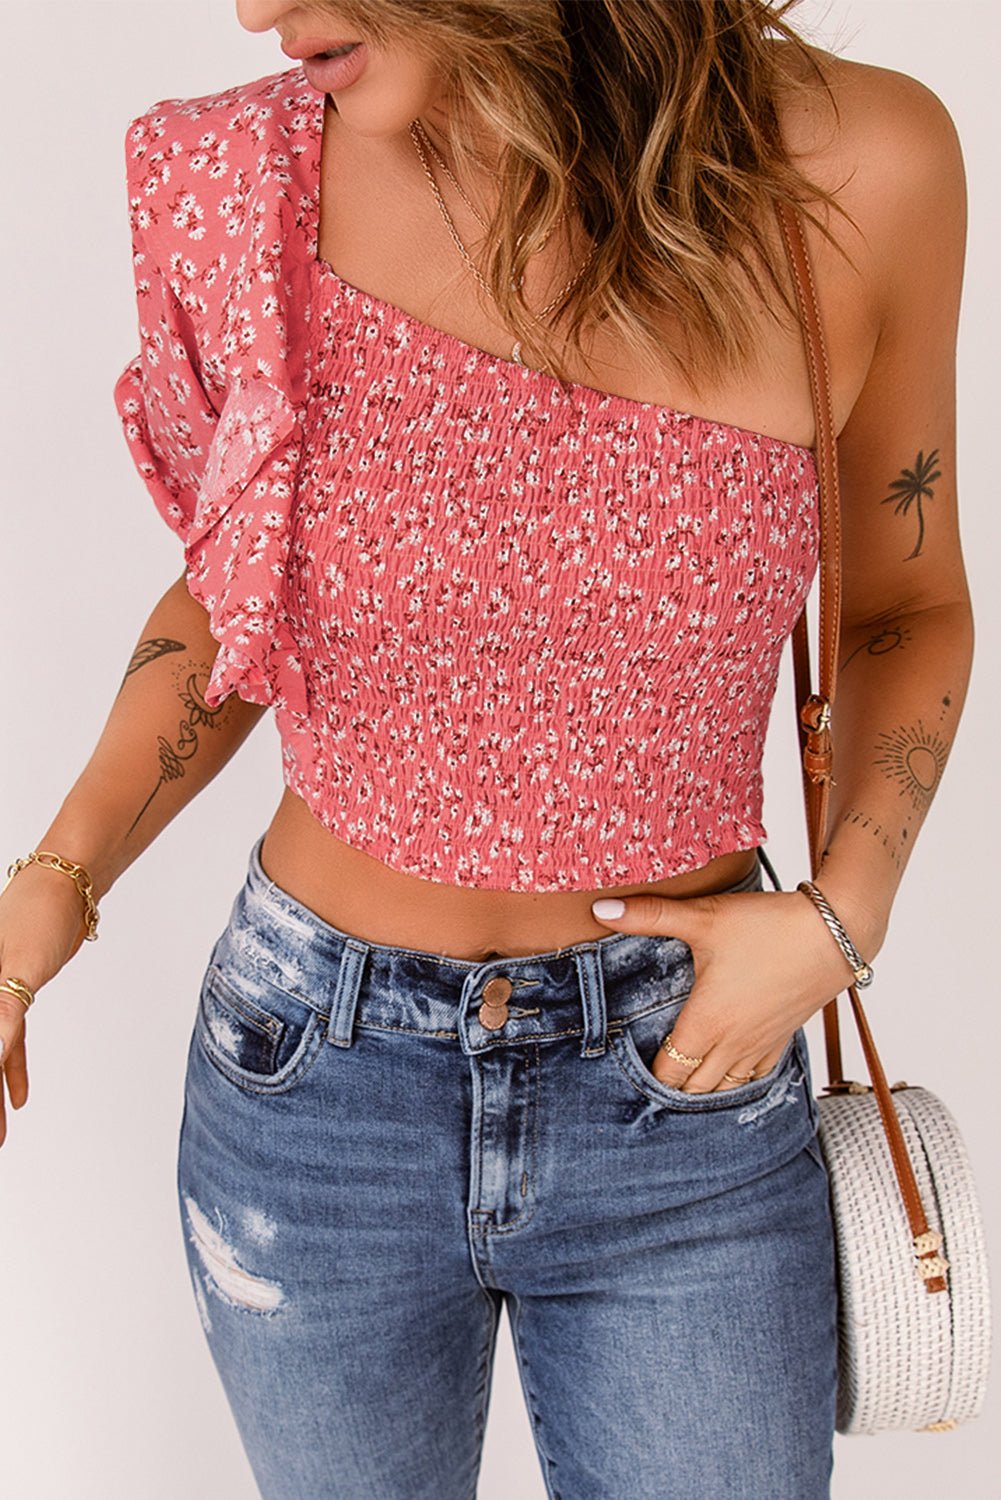 Ditsy Floral Ruffled One-Shoulder Smocked Top - Fashion Girl Online Store